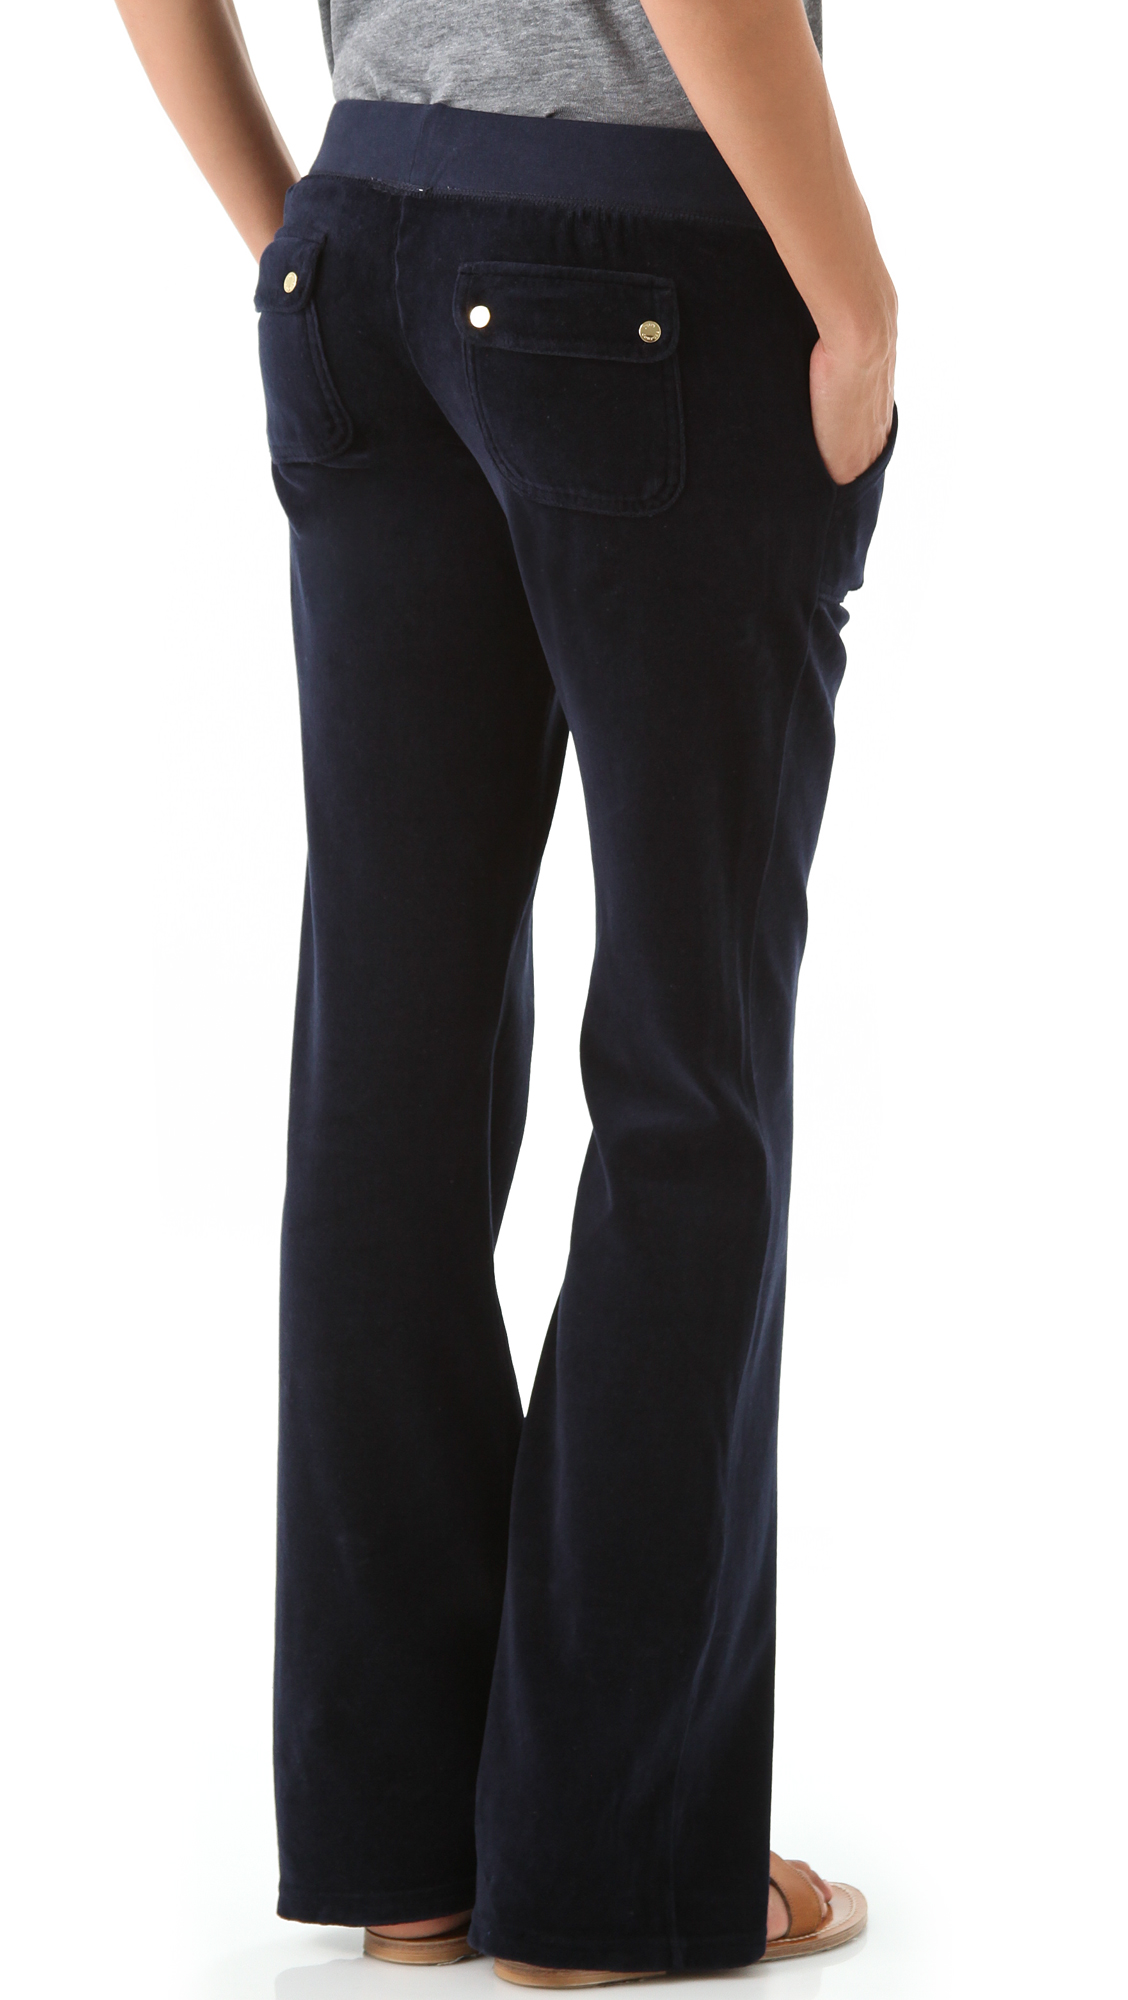 Juicy Couture Velour Boot Cut Pants with Snap Pockets in Blue - Lyst